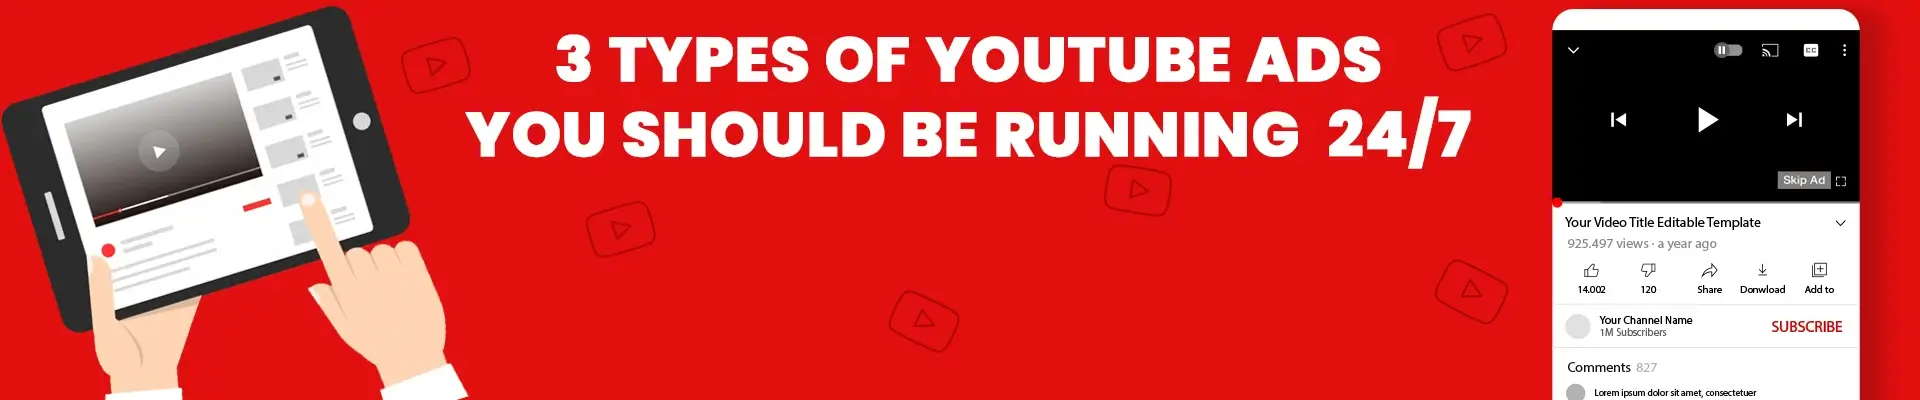 3 Types of YouTube Ads You Should be Running on YouTube 24/7 [2021]